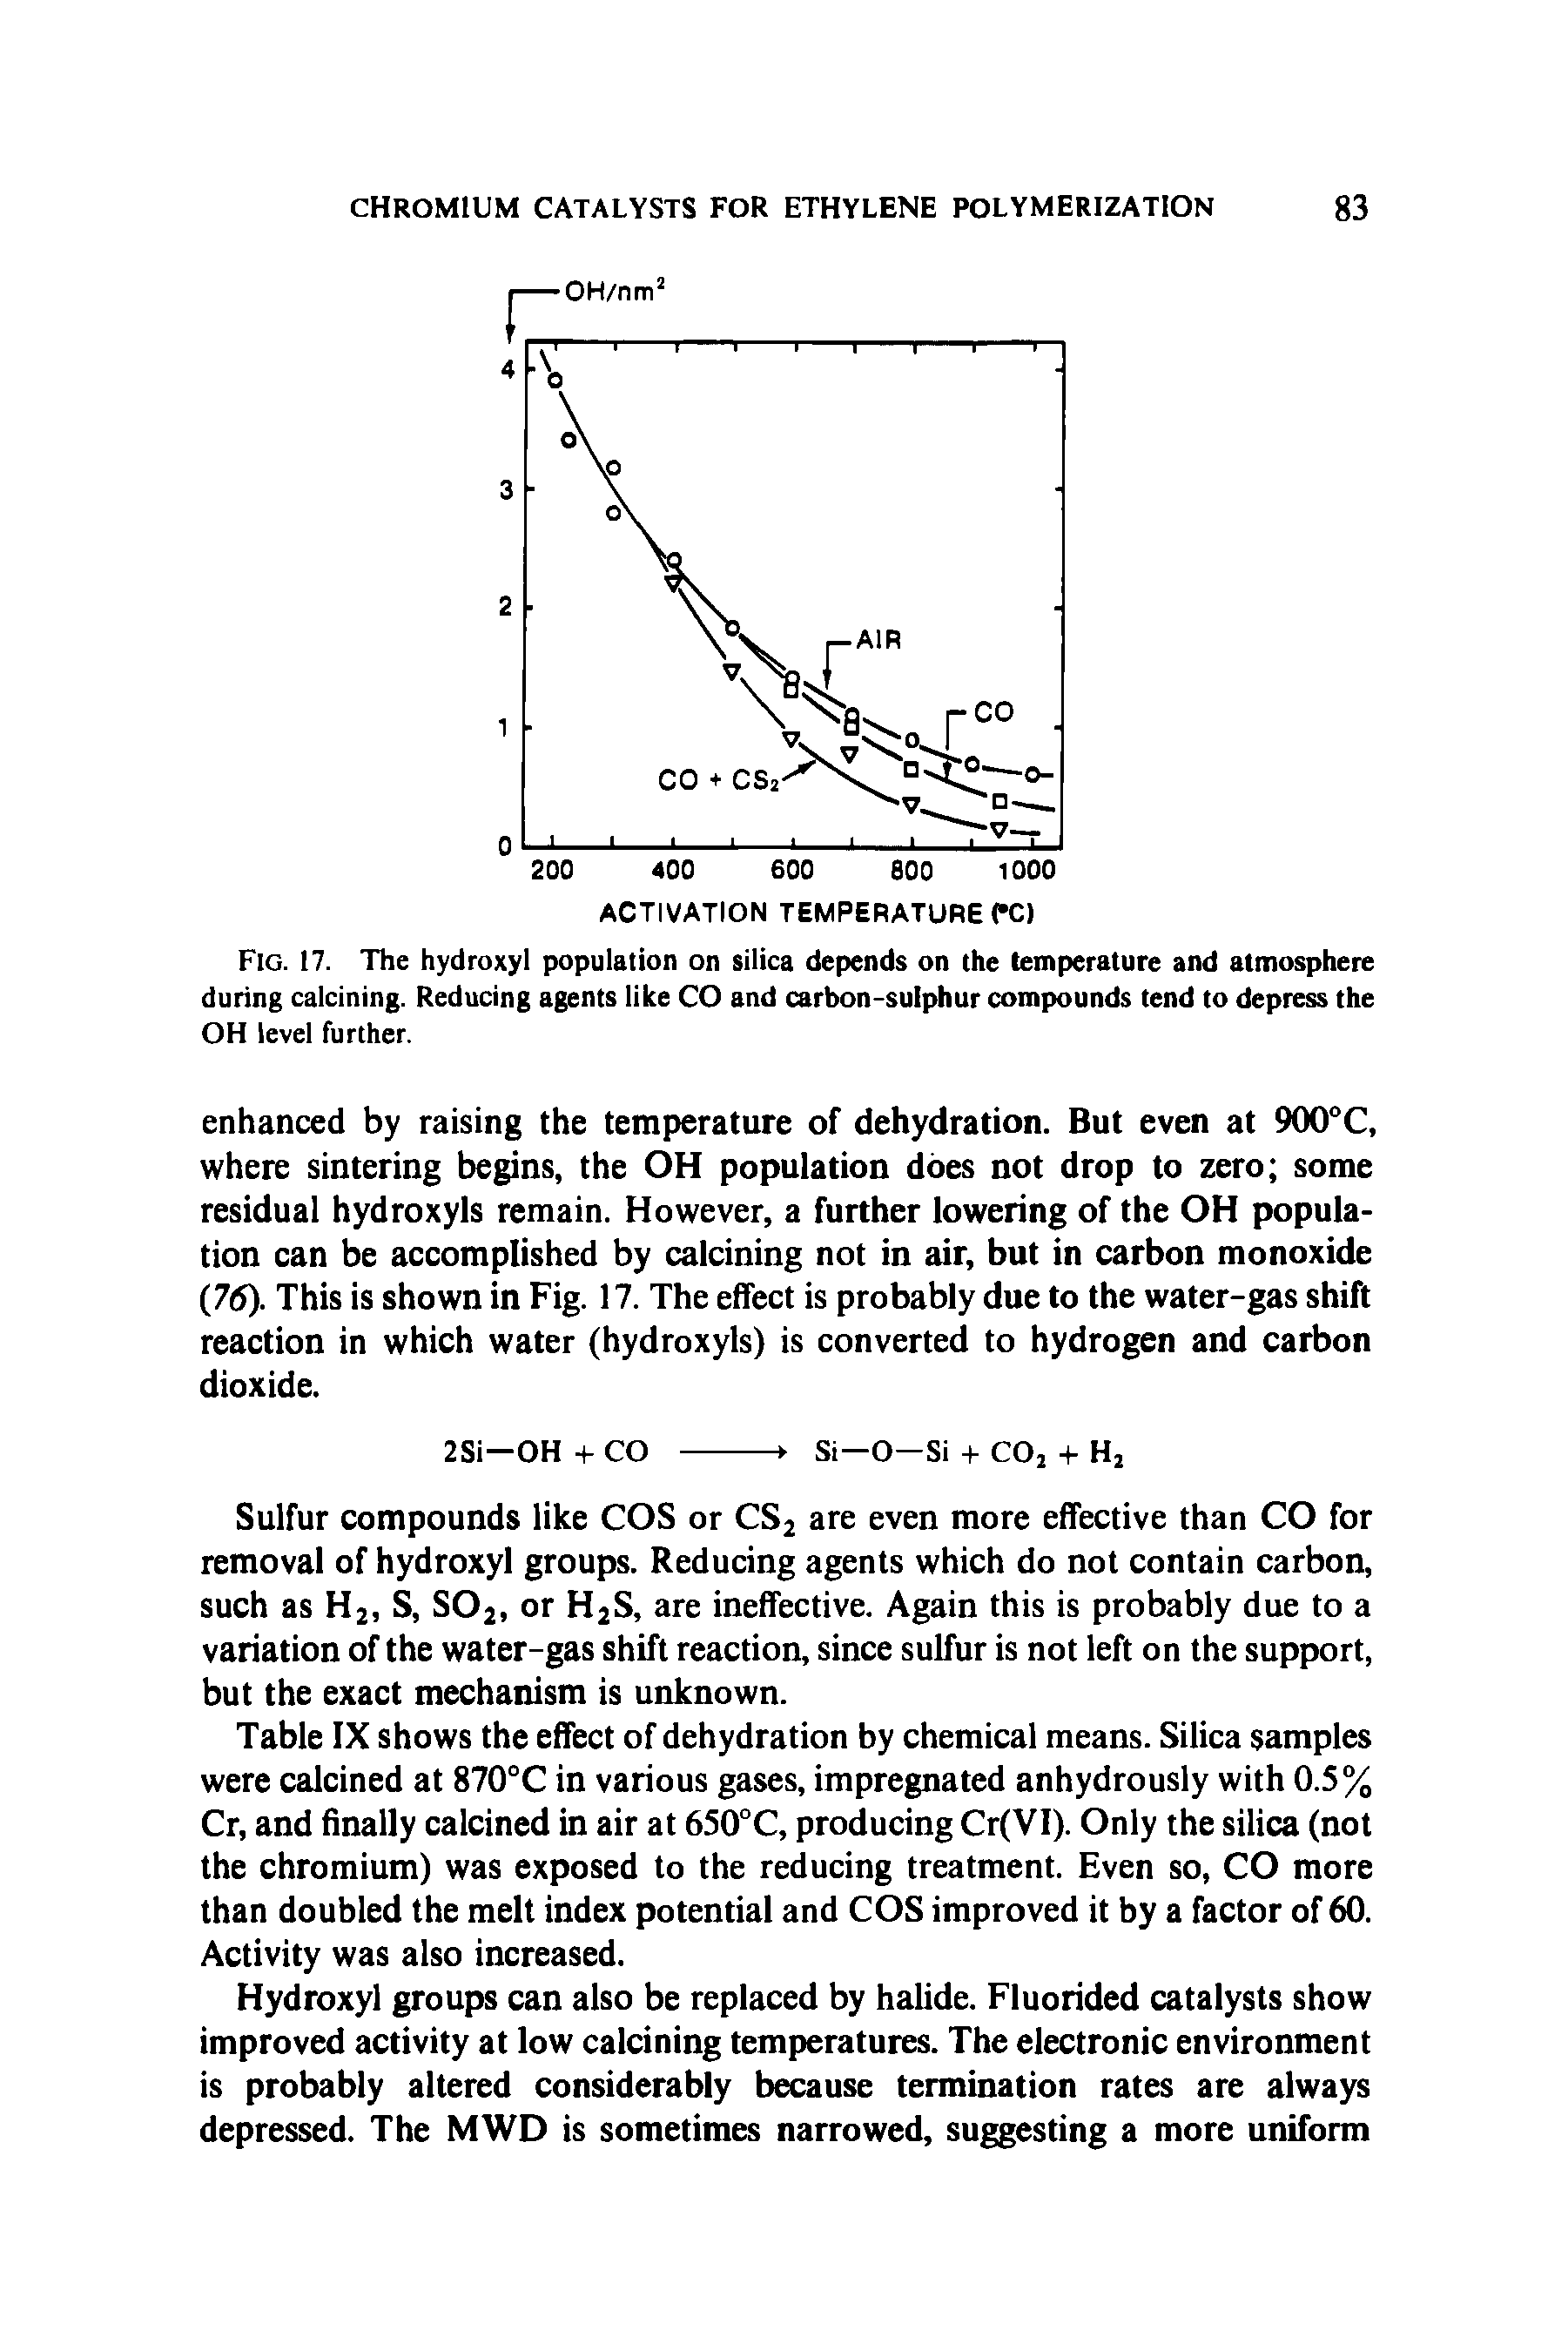 Table IX shows the effect of dehydration by chemical means. Silica samples were calcined at 870°C in various gases, impregnated anhydrously with 0.5% Cr, and finally calcined in air at 650°C, producing Cr(VI). Only the silica (not the chromium) was exposed to the reducing treatment. Even so, CO more than doubled the melt index potential and COS improved it by a factor of 60. Activity was also increased.